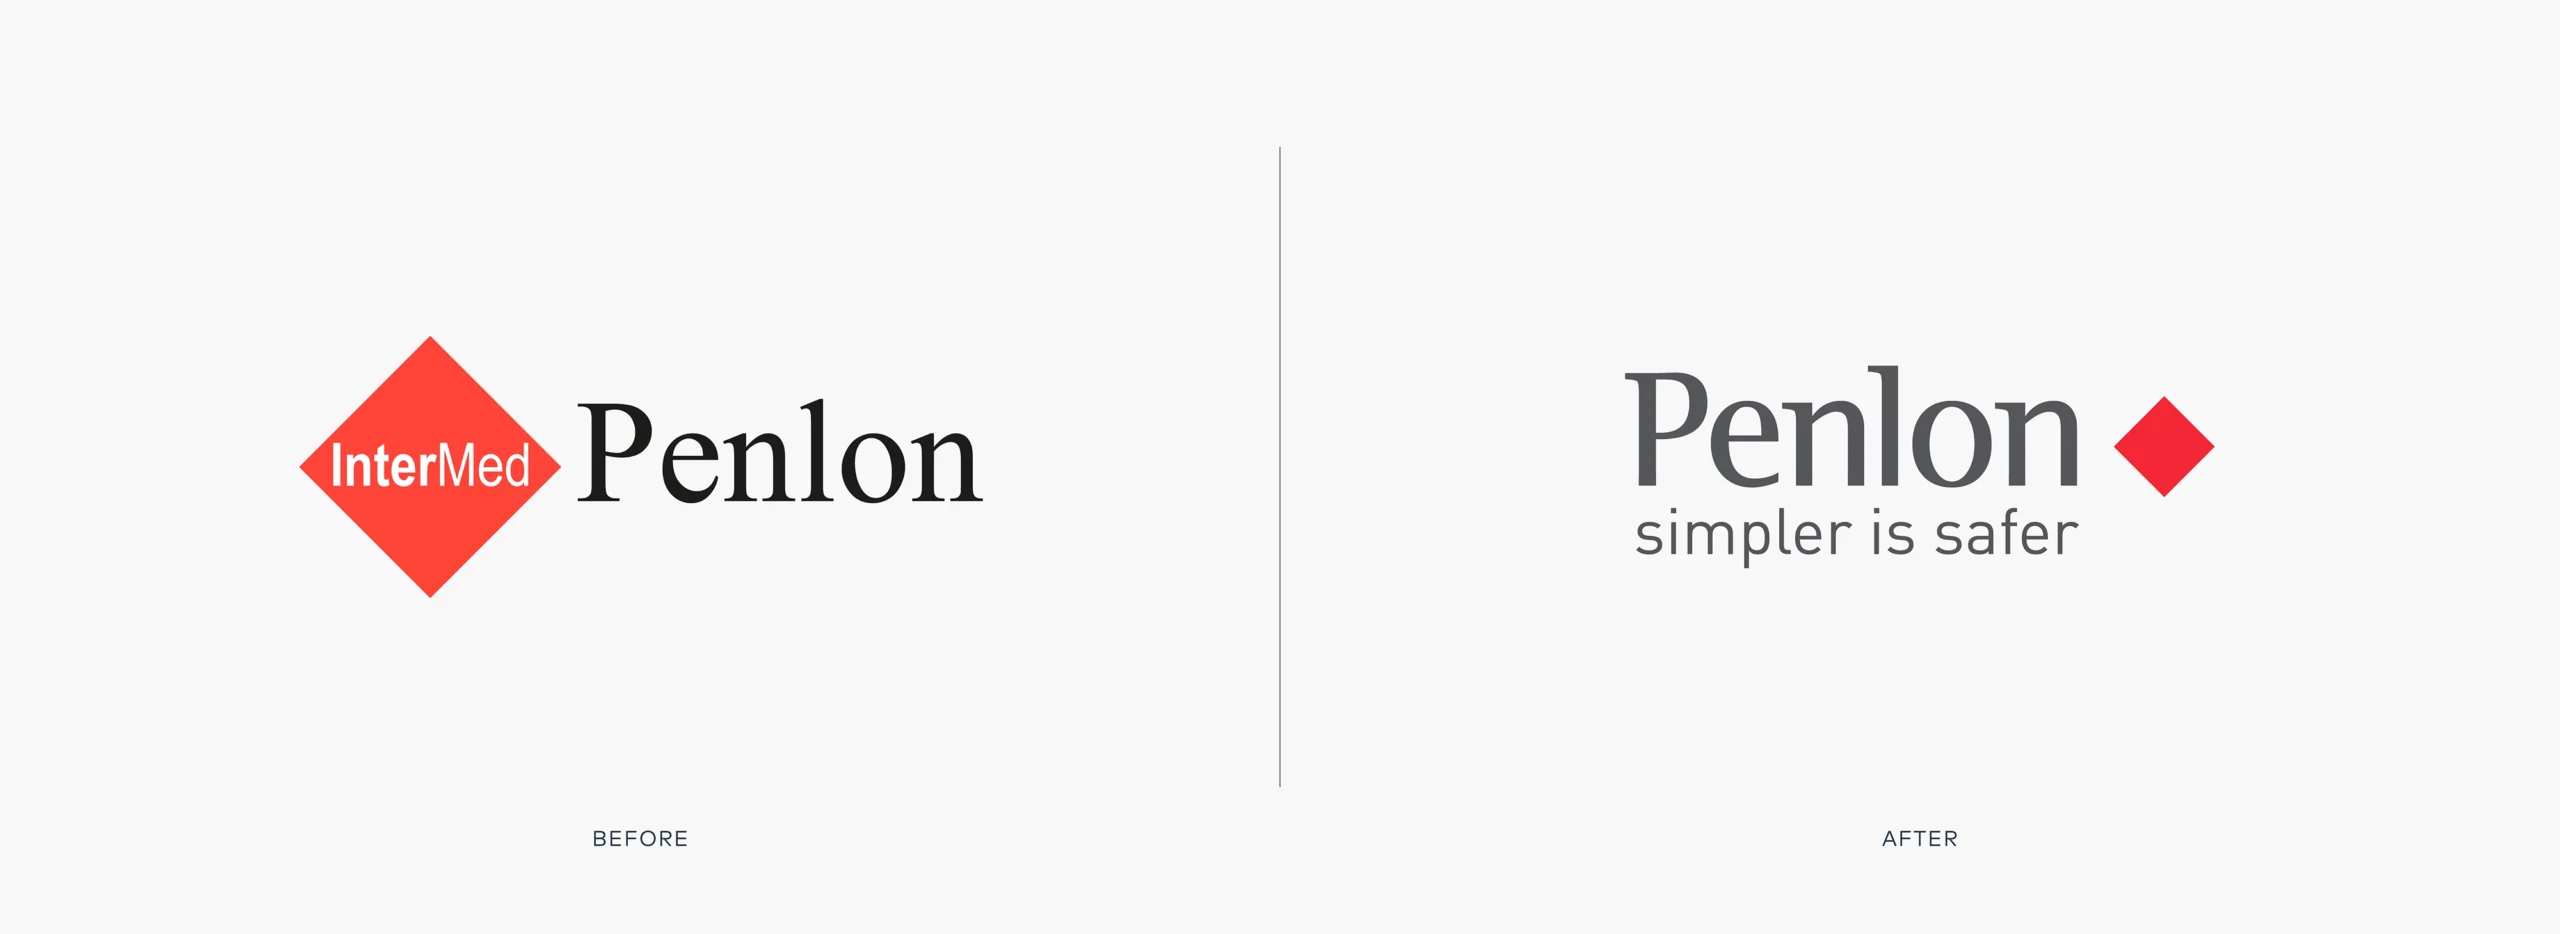 Penlon case study logo before and after image